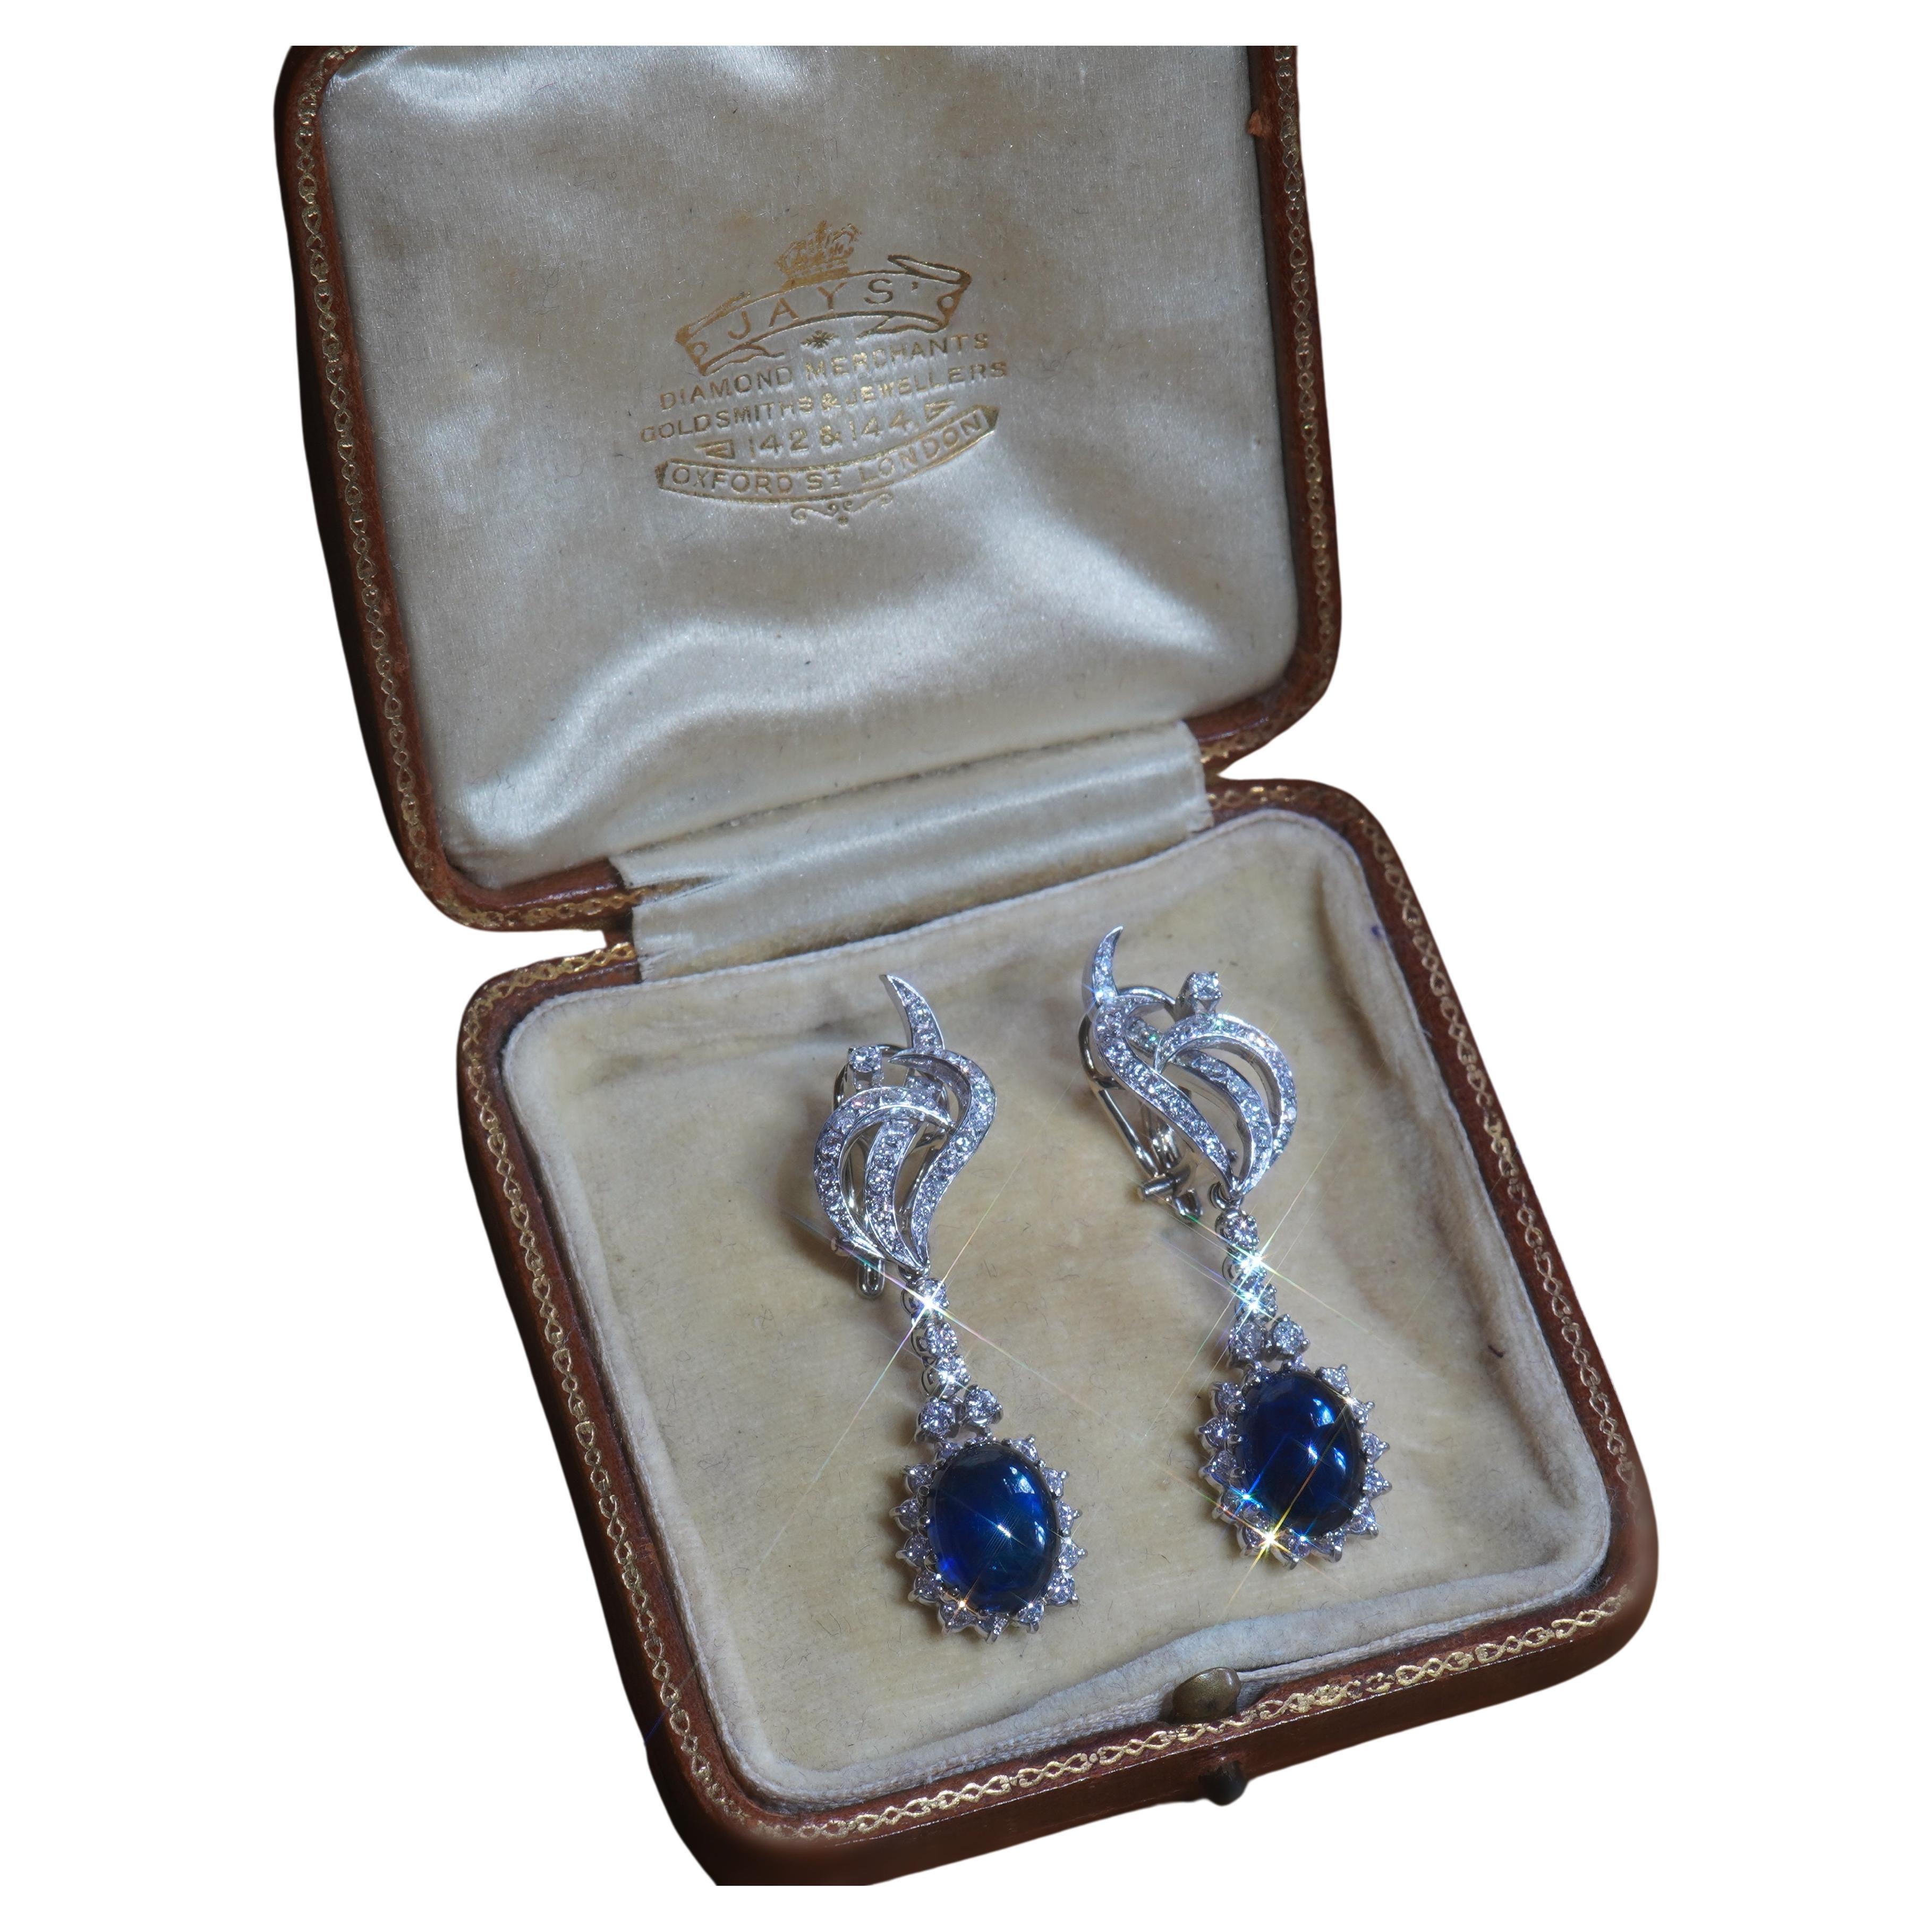 Old South Jewels proudly presents...VINTAGE LUXURY... GIA CERTIFIED PLATINUM 13.92 CARAT UNHEATED STAR SAPPHIRE DIAMOND VINTAGE EARRINGS.   11.74 CARAT TRANSPARENT BLUE GIA CERTIFIED NATURAL SAPPHIRES.  Gorgeous Vintage Sapphires are Crowned With